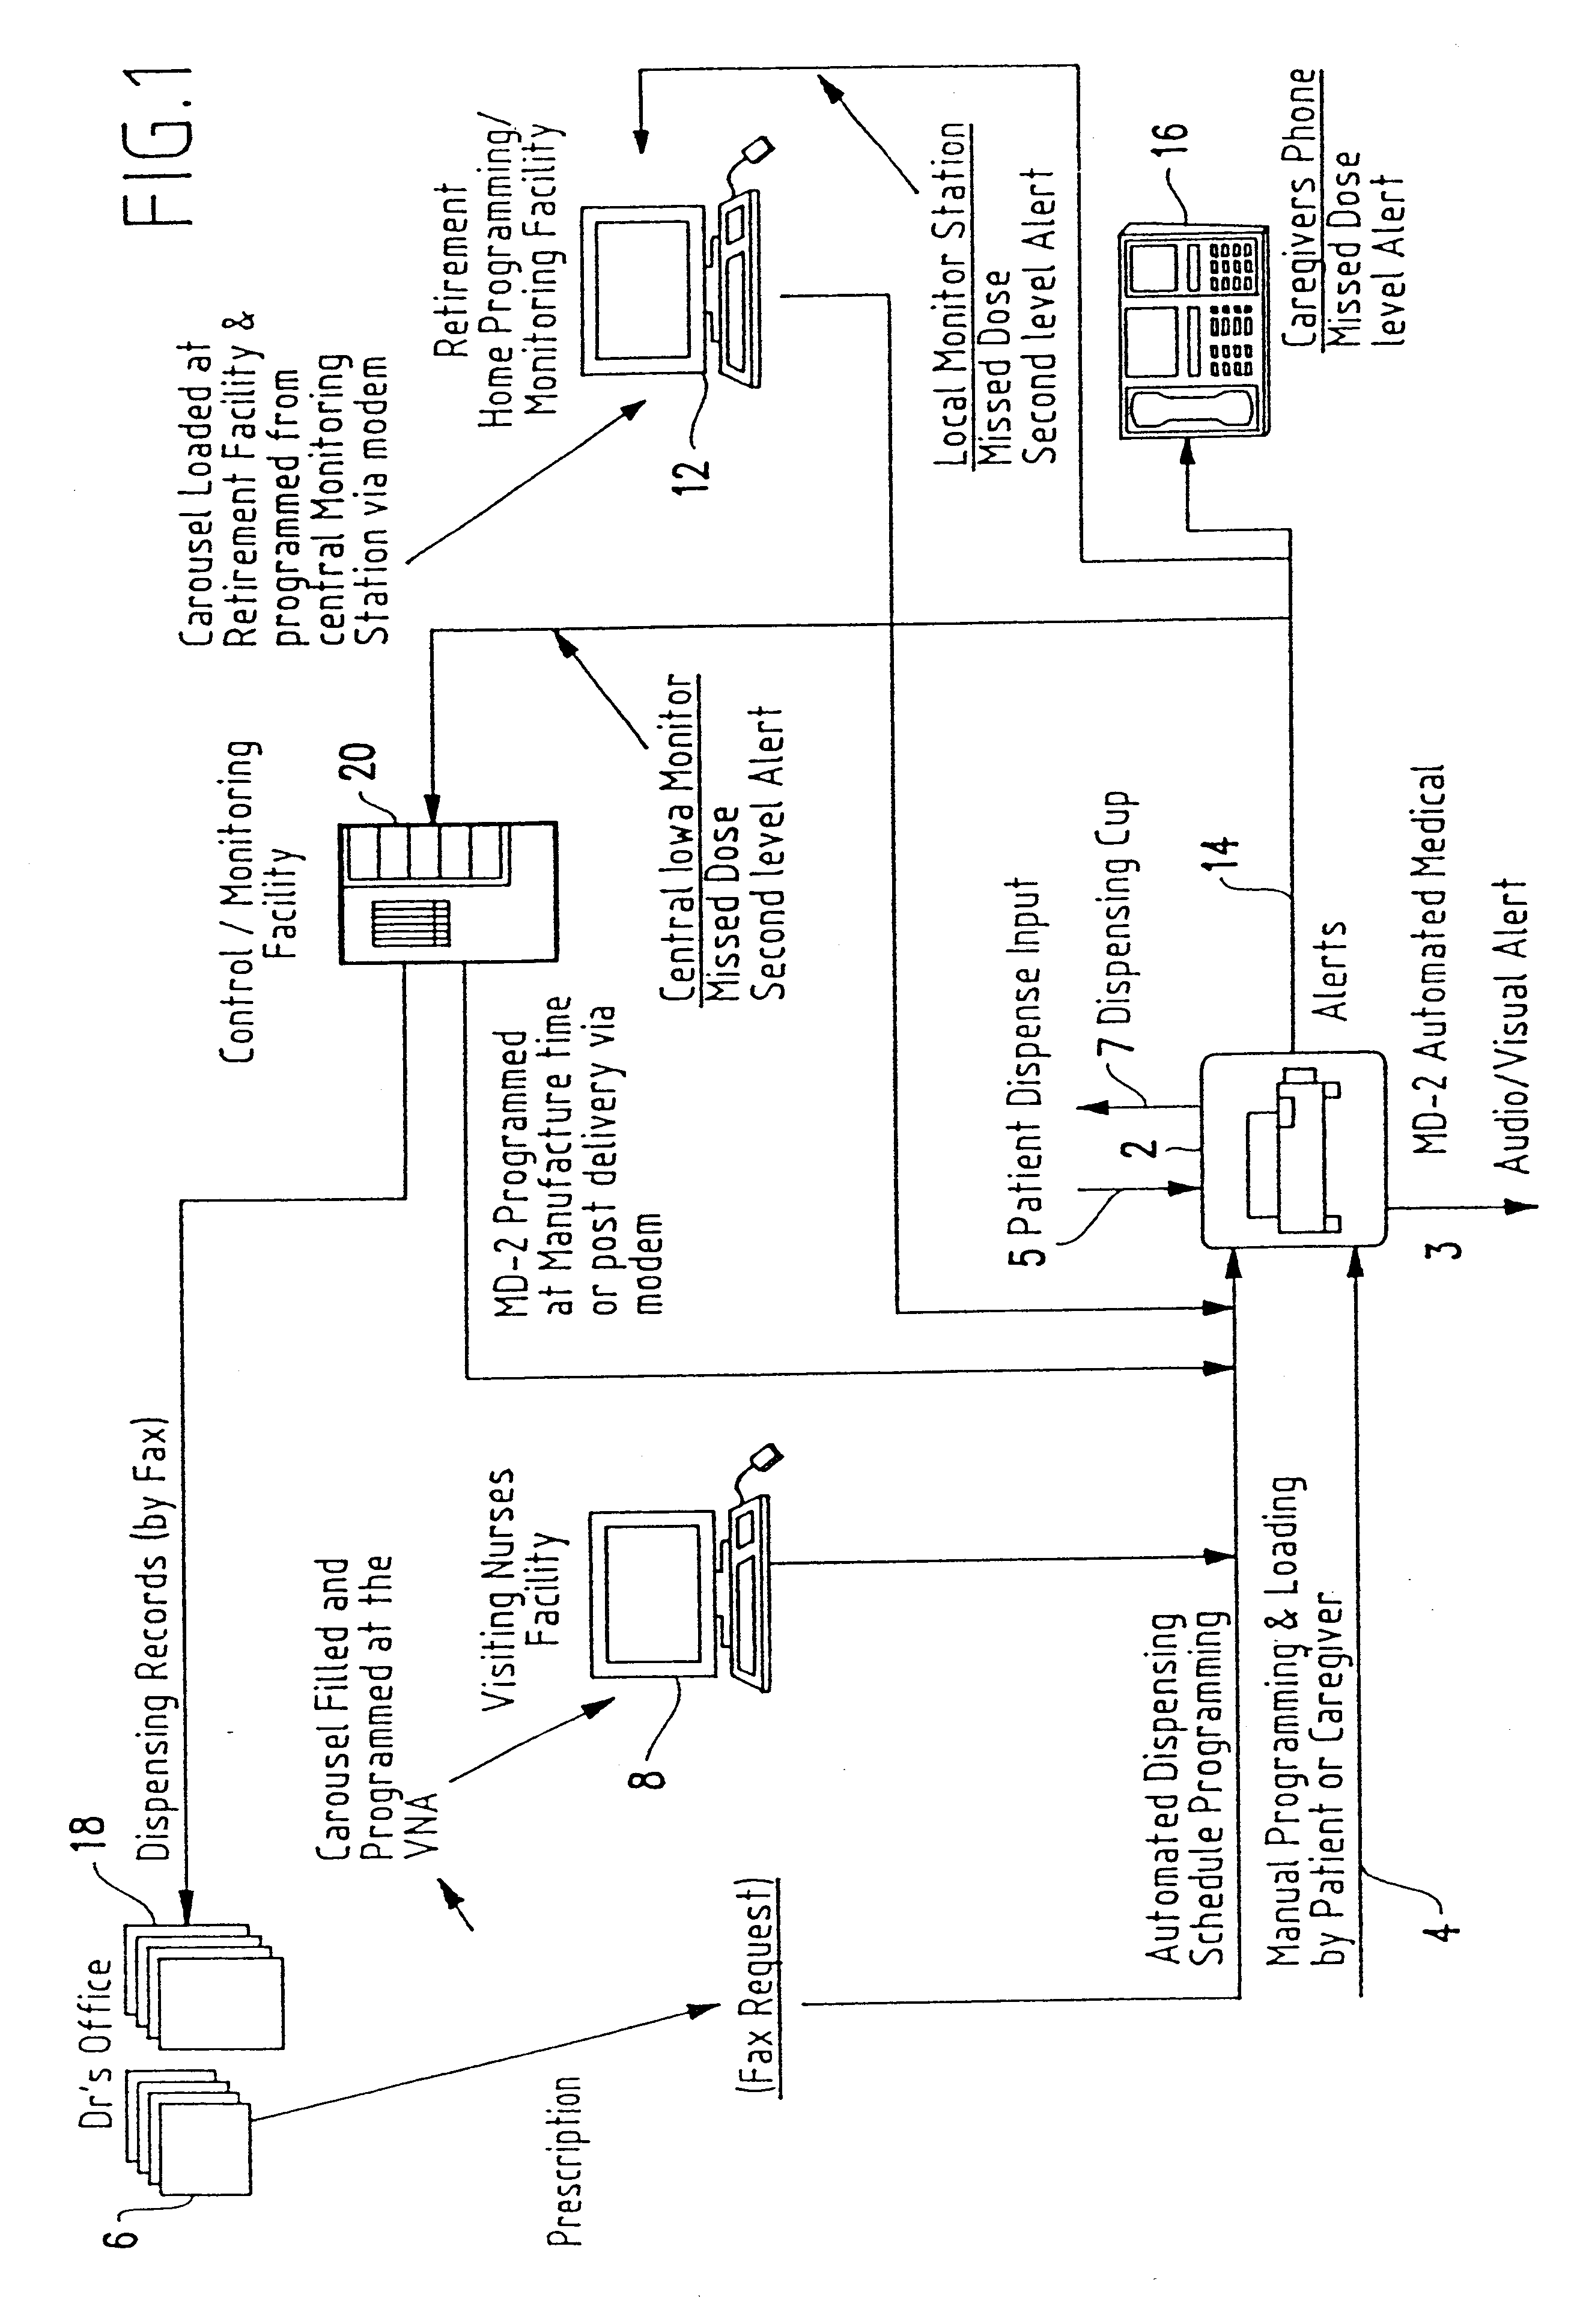 Apparatus and method for medication dispensing and messaging